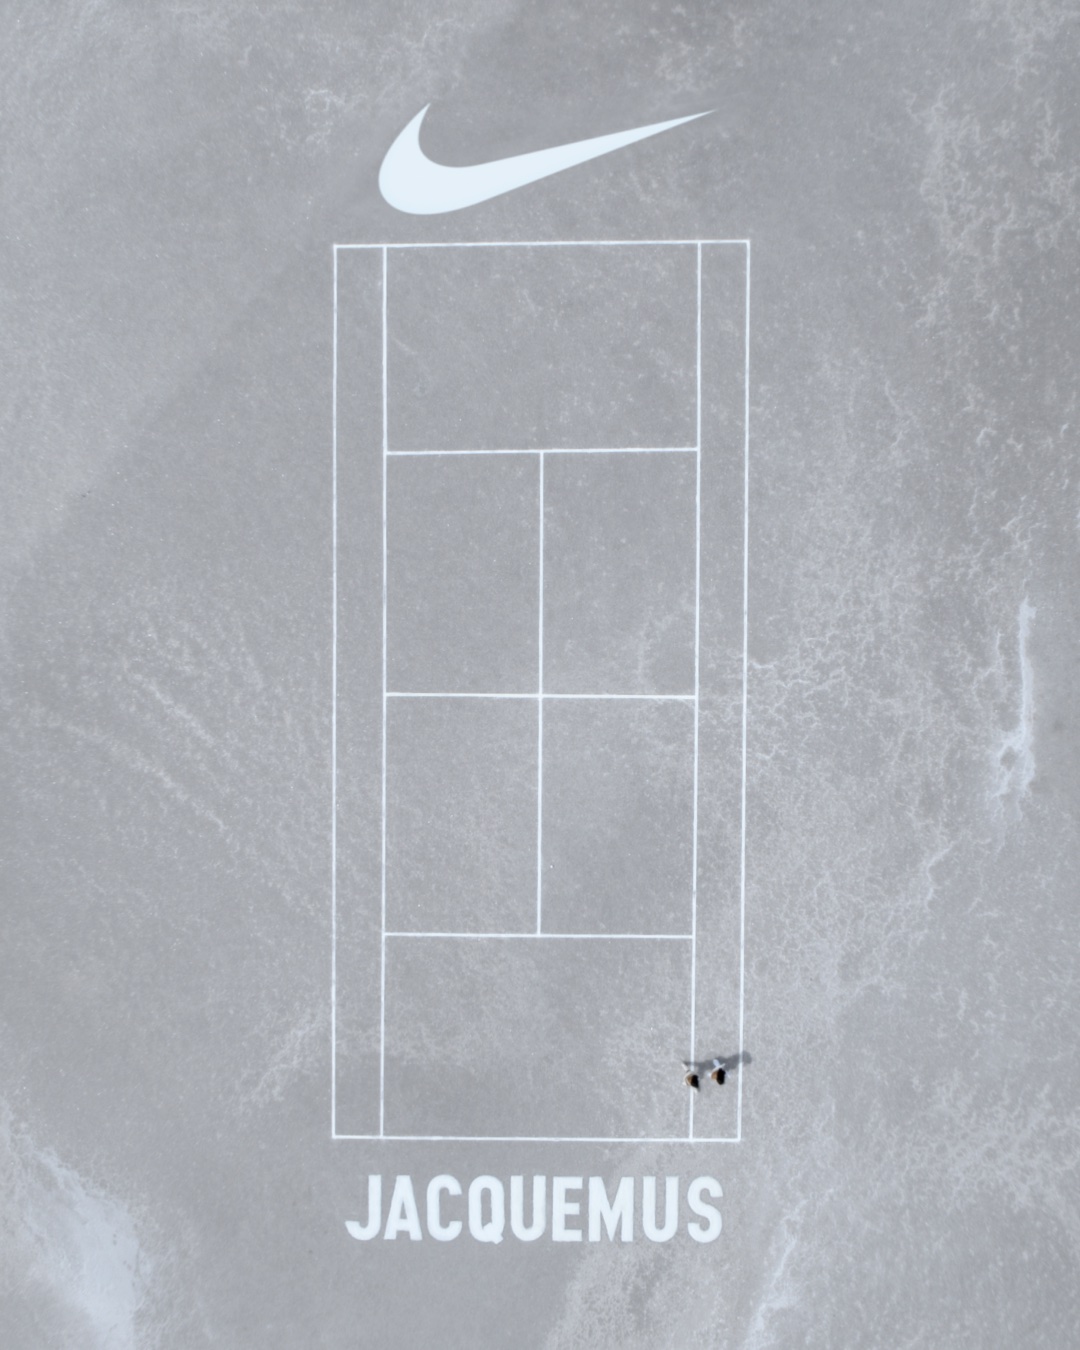 Jacquemus took to Instagram to post a sneak peek of his Nike collaboration. 